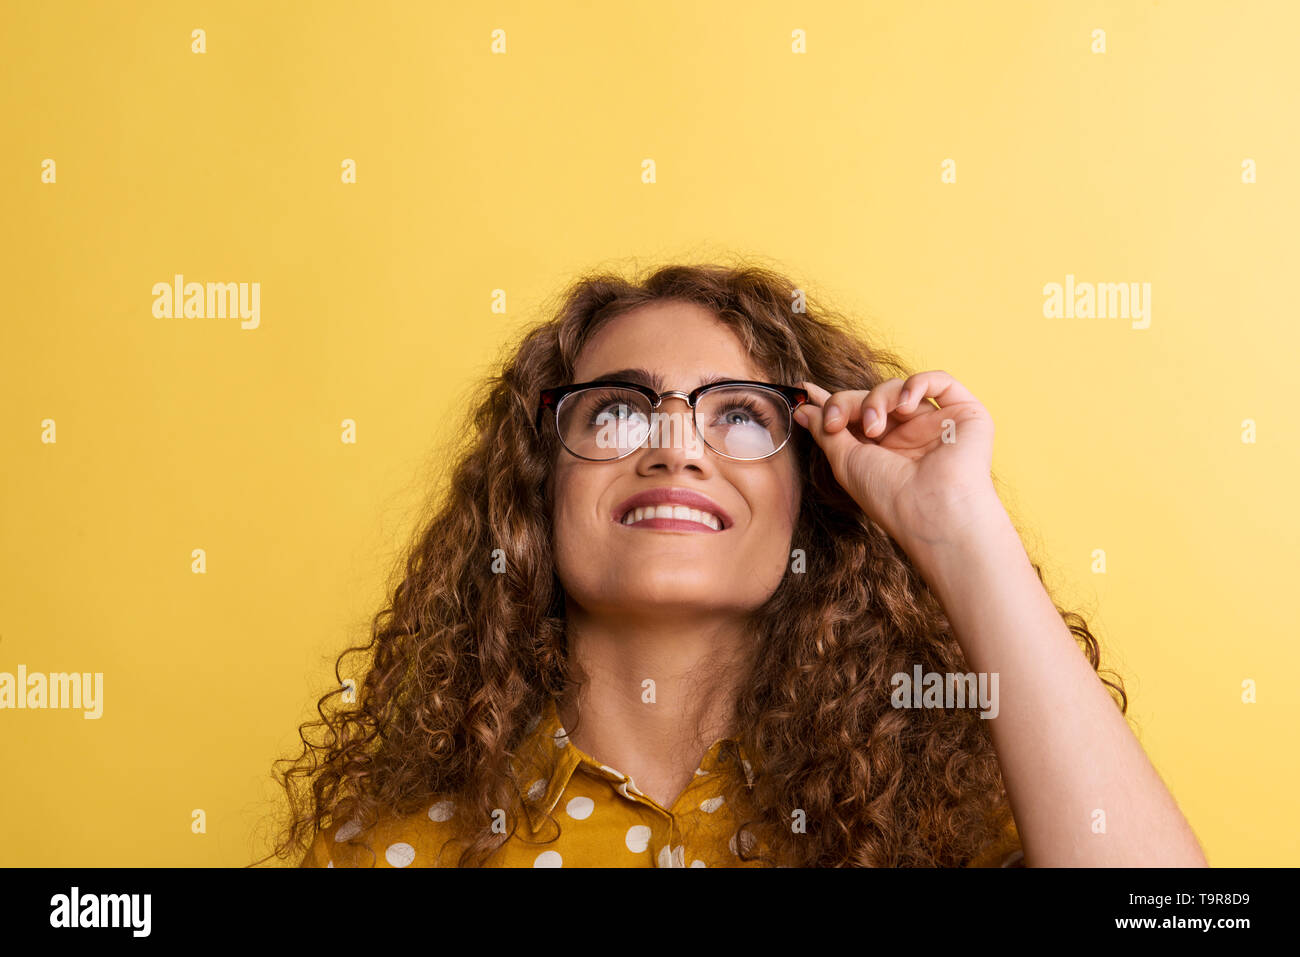 Portrait of a young woman with glasses in a studio on a yellow background. Stock Photo